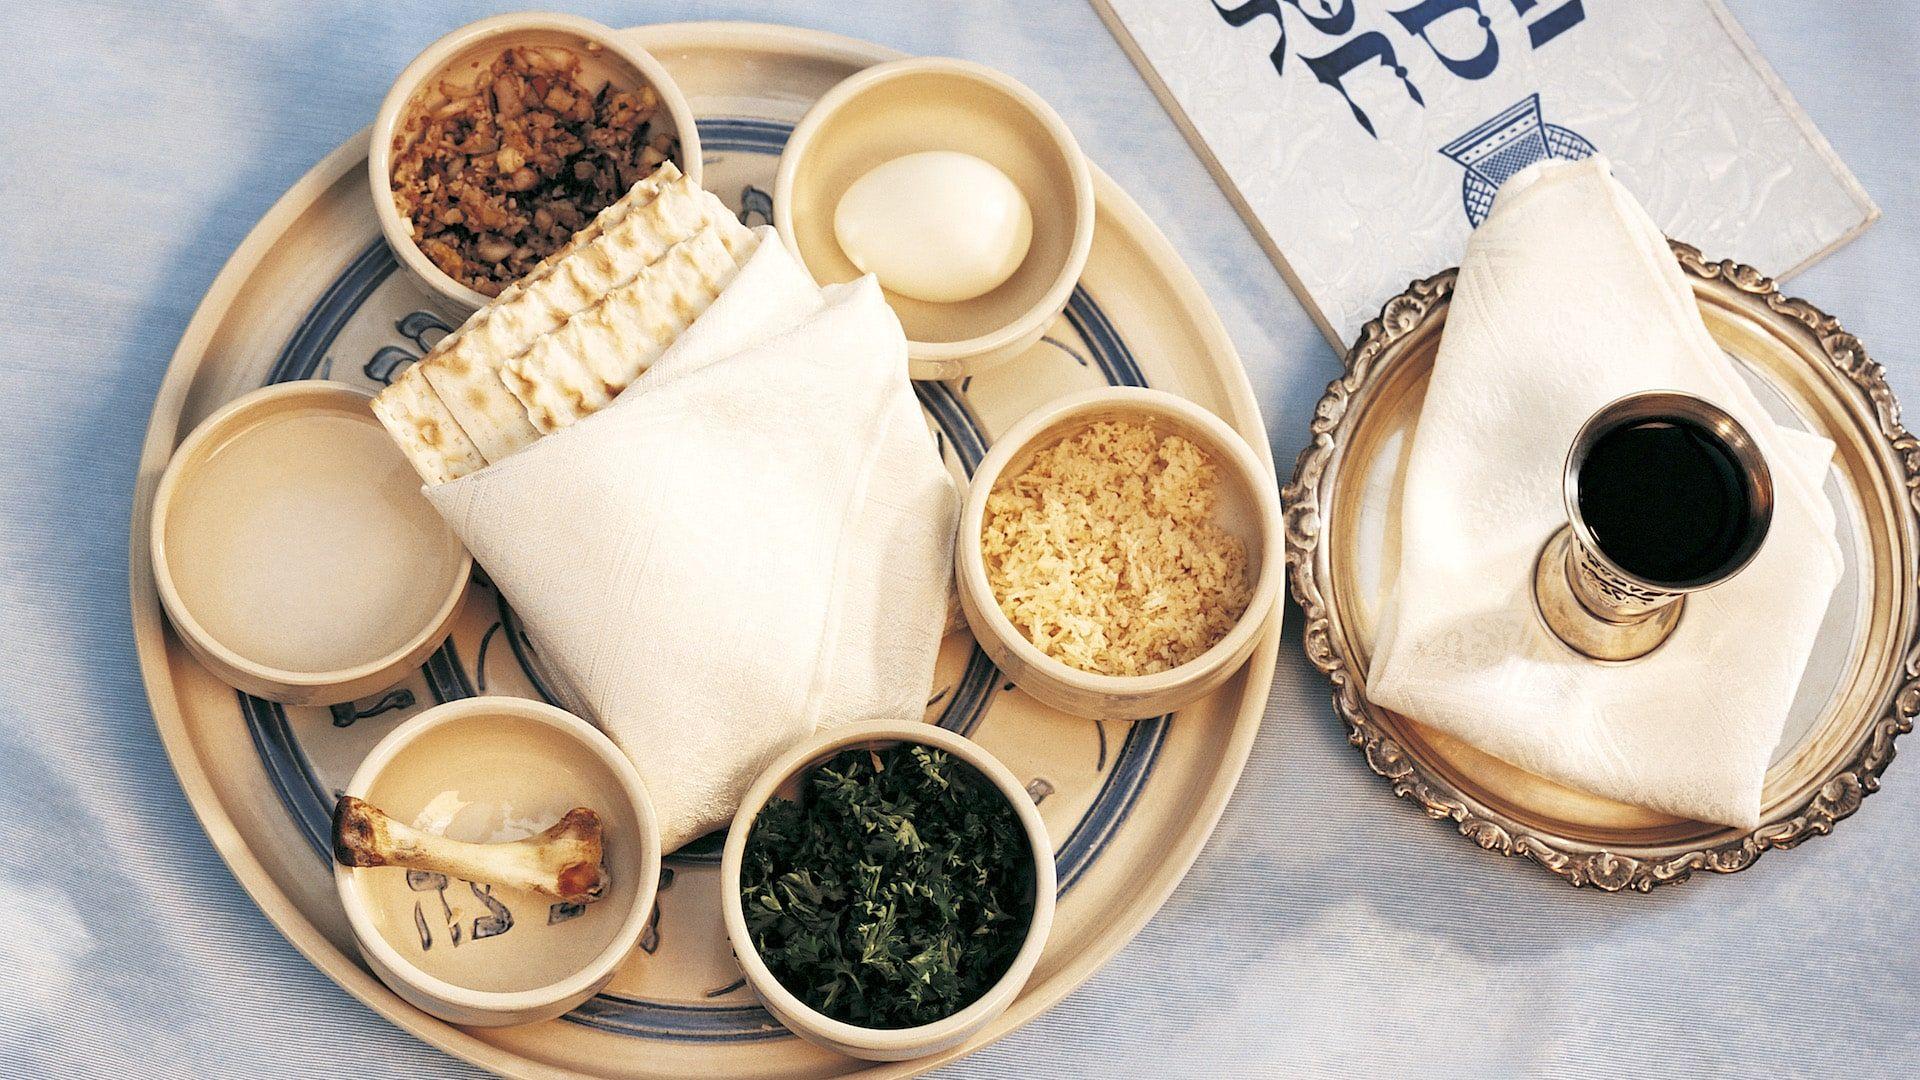 Here’s the Meaning Behind the Passover Seder Plate